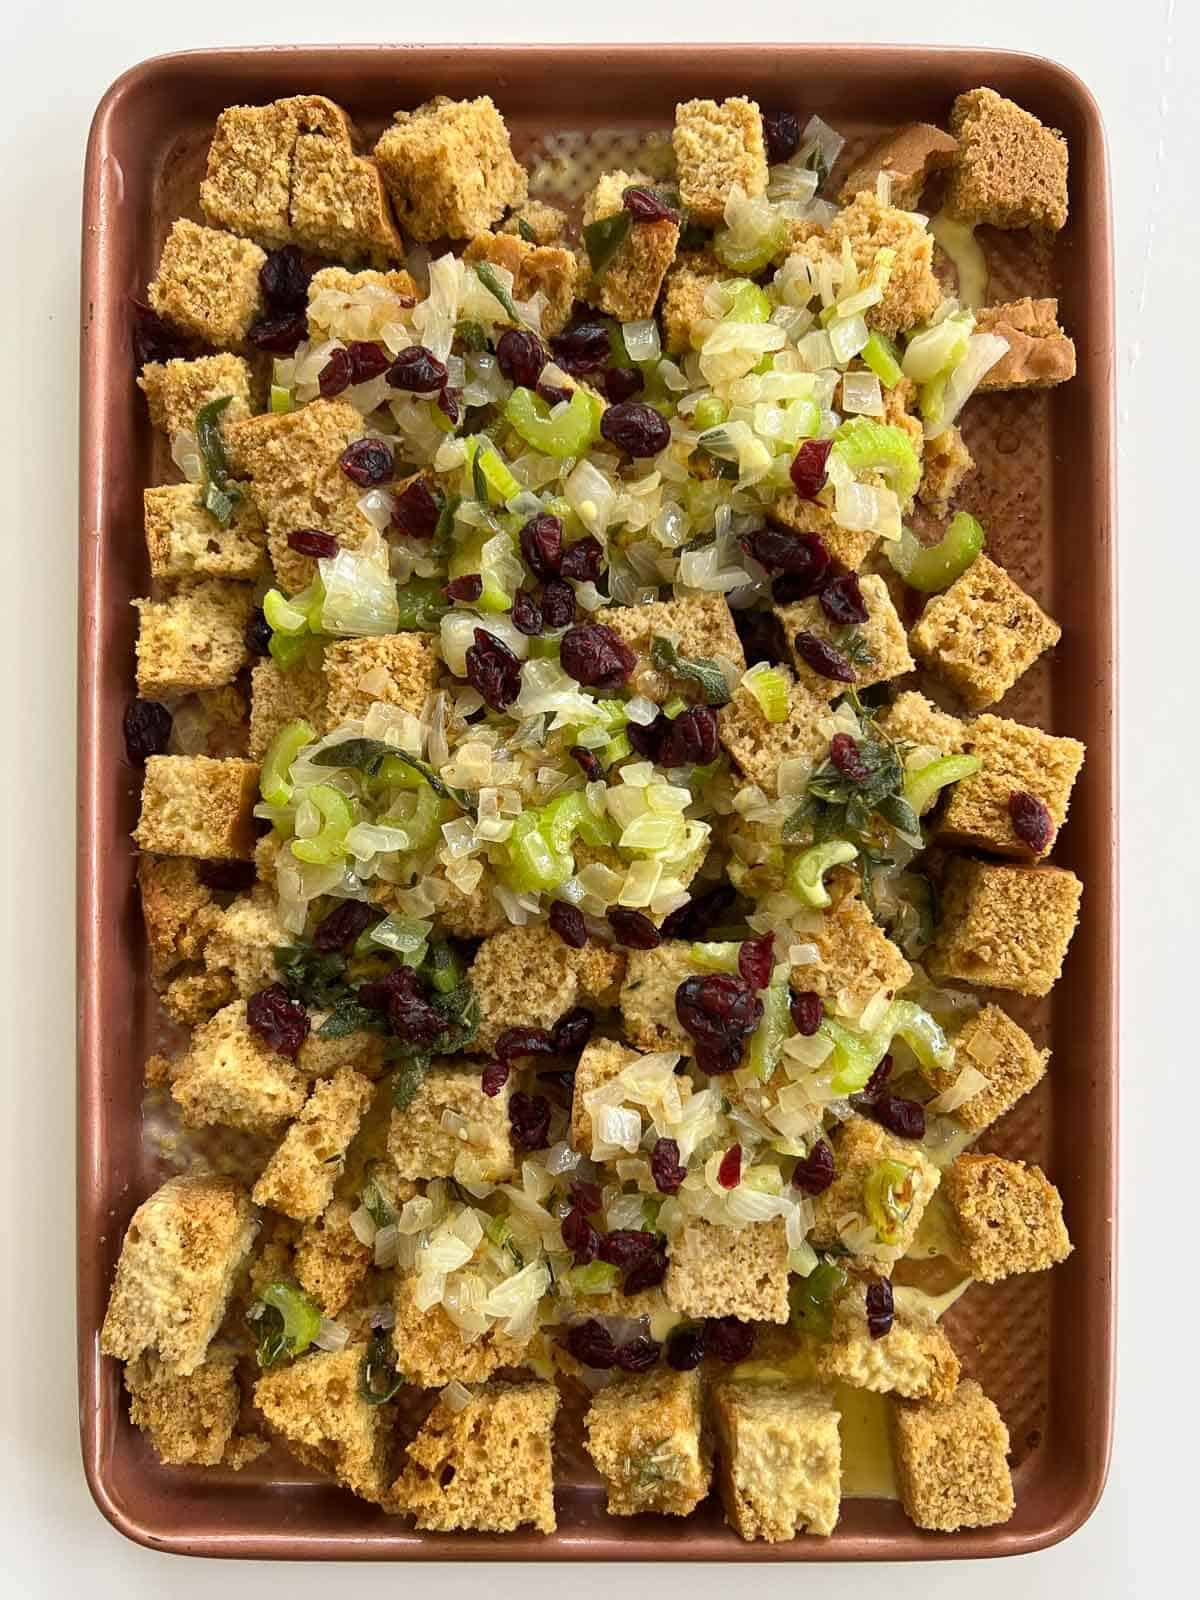 gluten-free cornbread stuffing with cooked vegetables and cranberries on a baking sheet.